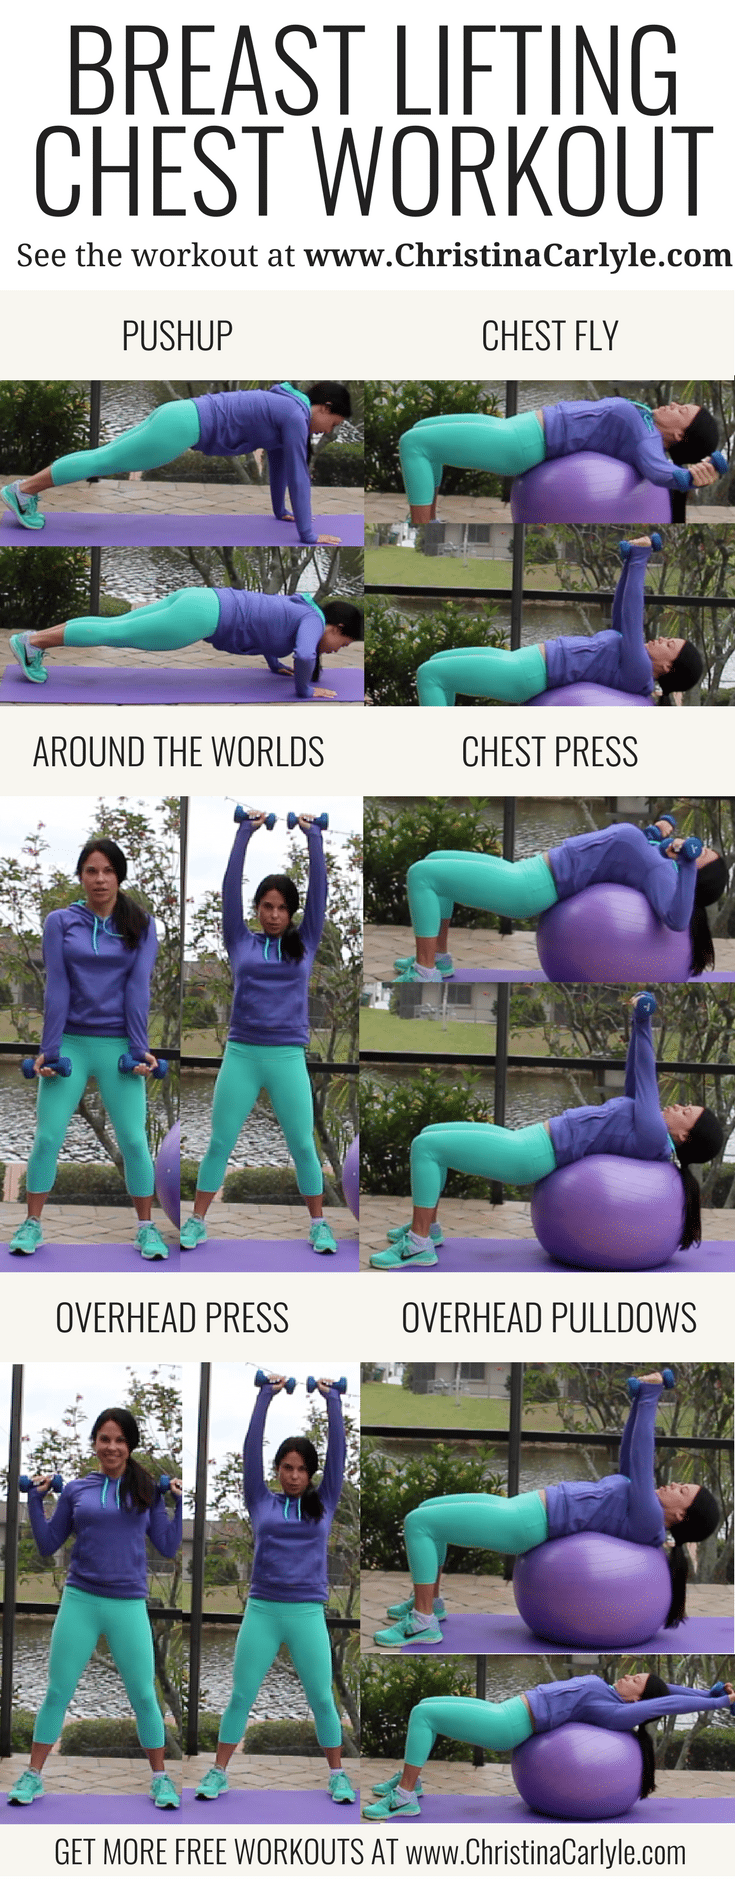 Pop Up Your Boobs Girls - Killer Chest Workout Routine